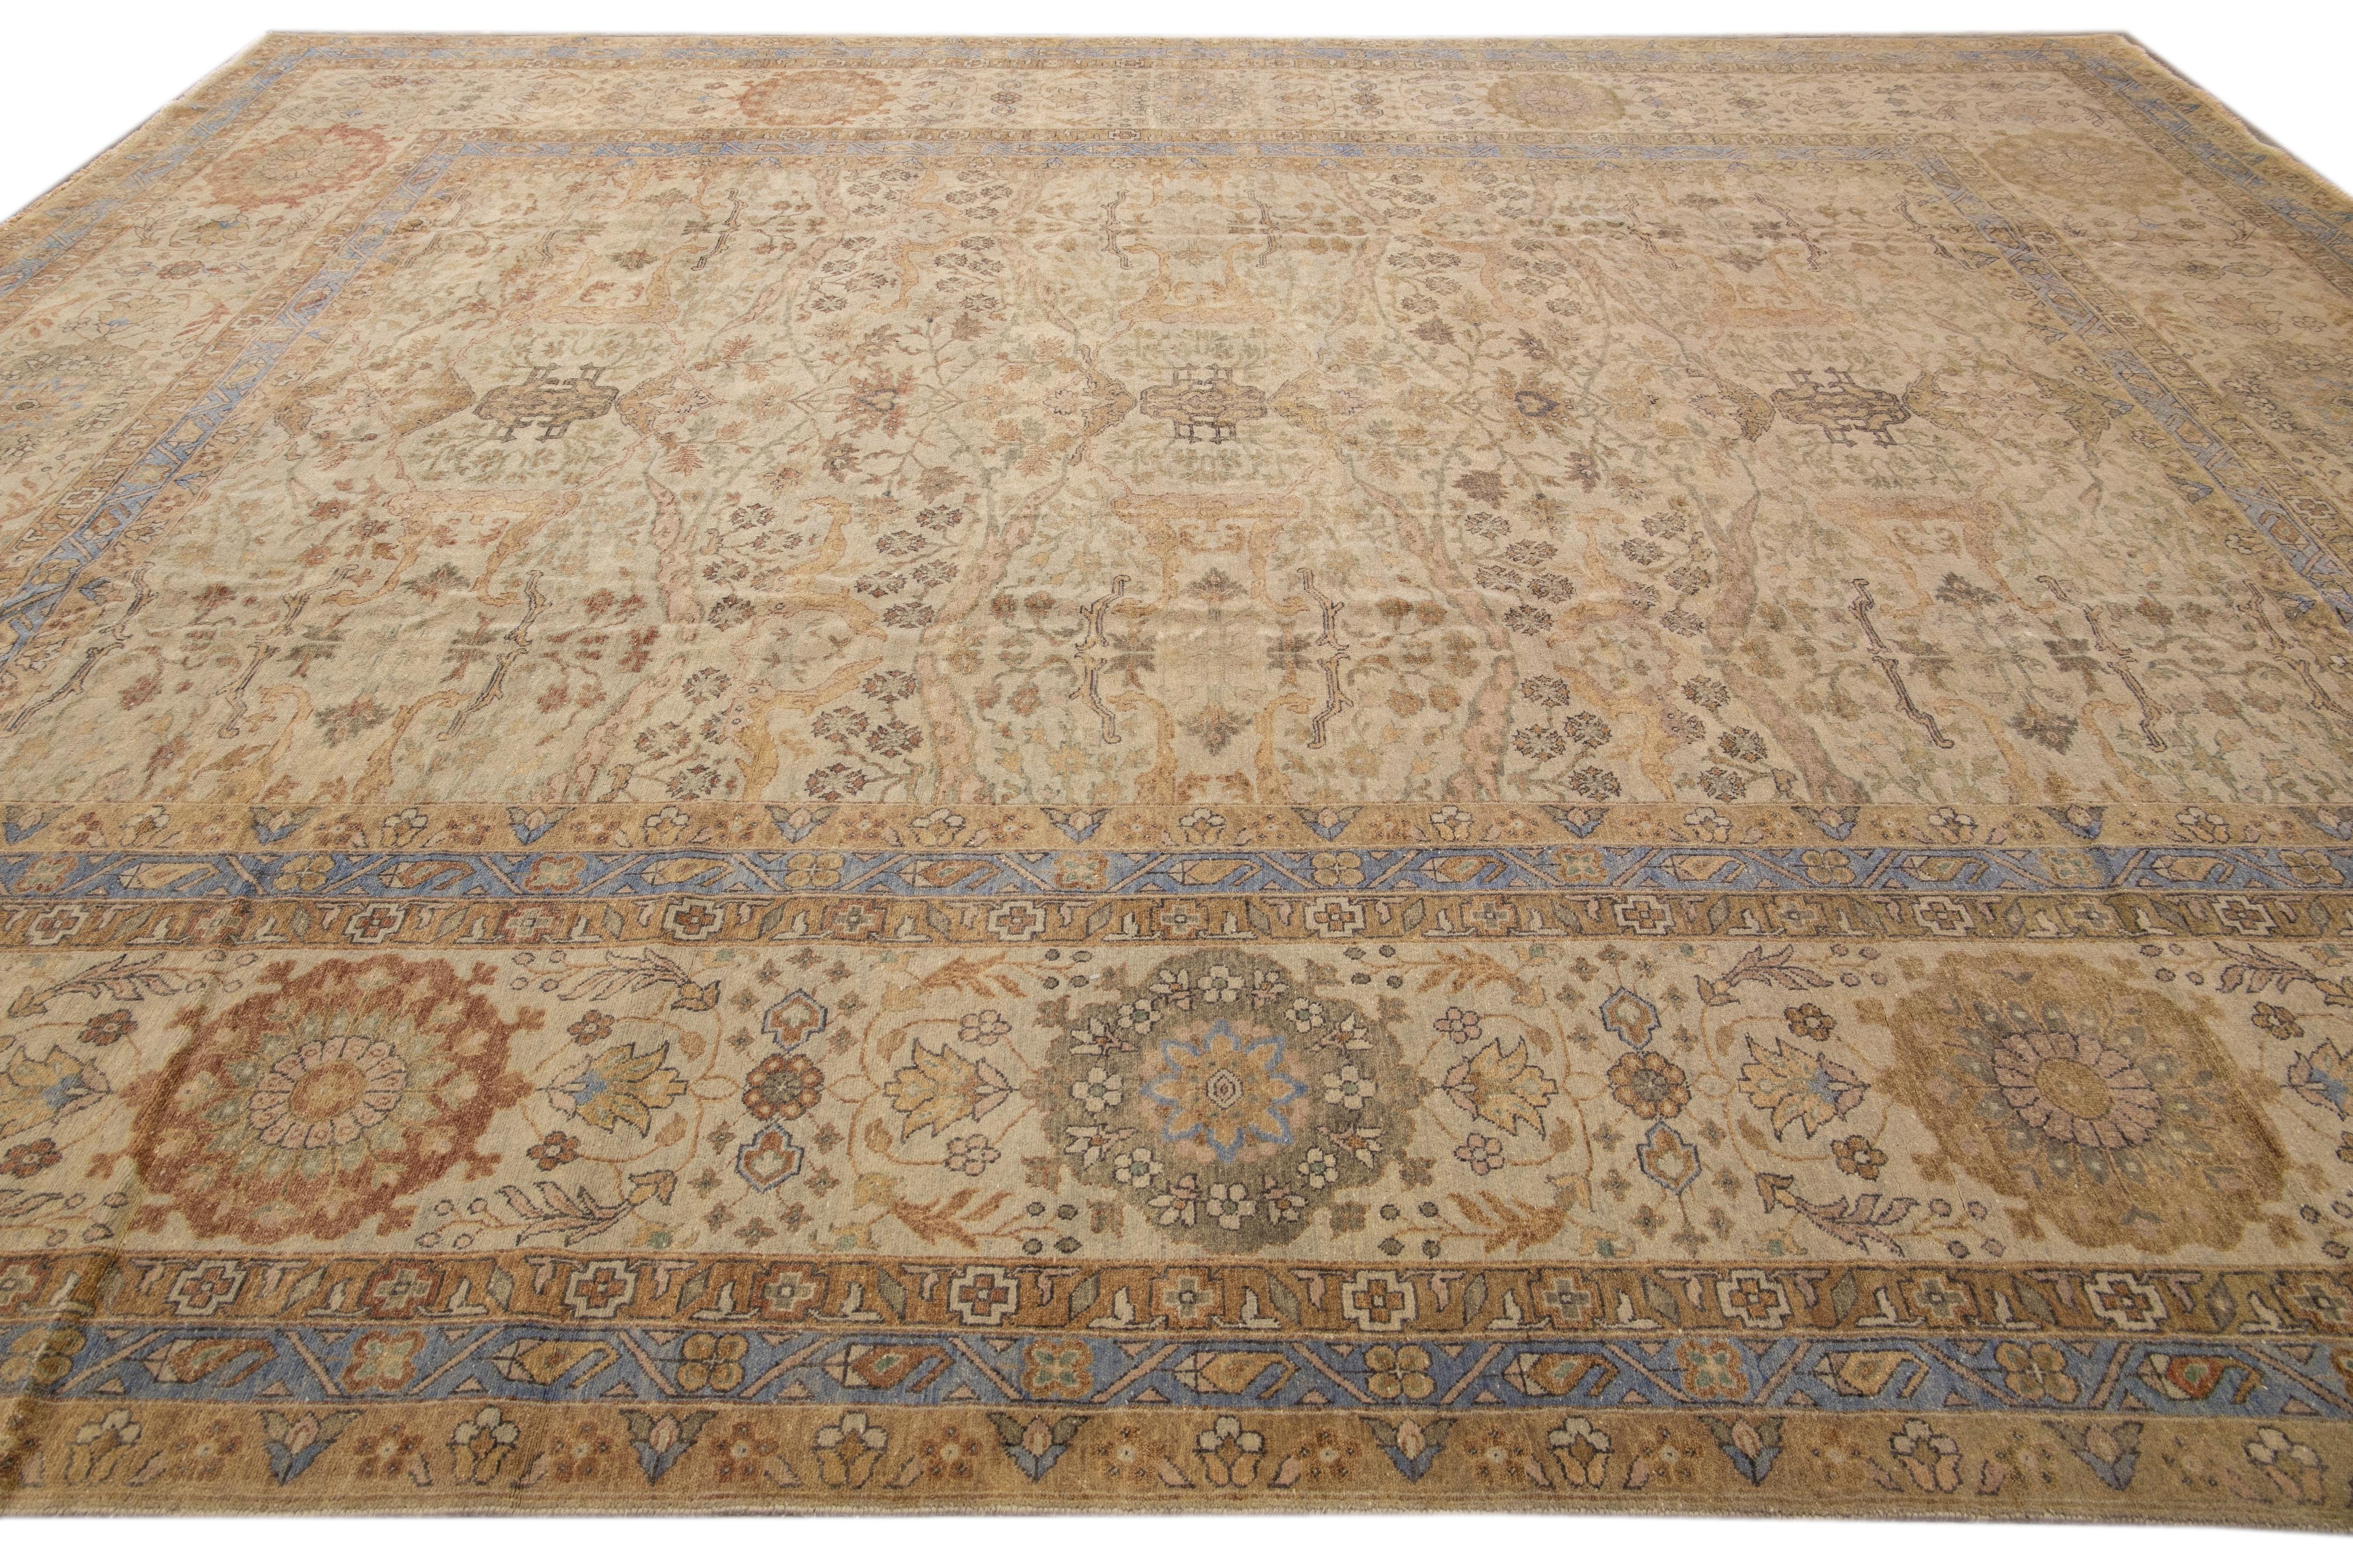 Beige Modern Indian Handmade Floral Designed Wool Rug In New Condition For Sale In Norwalk, CT